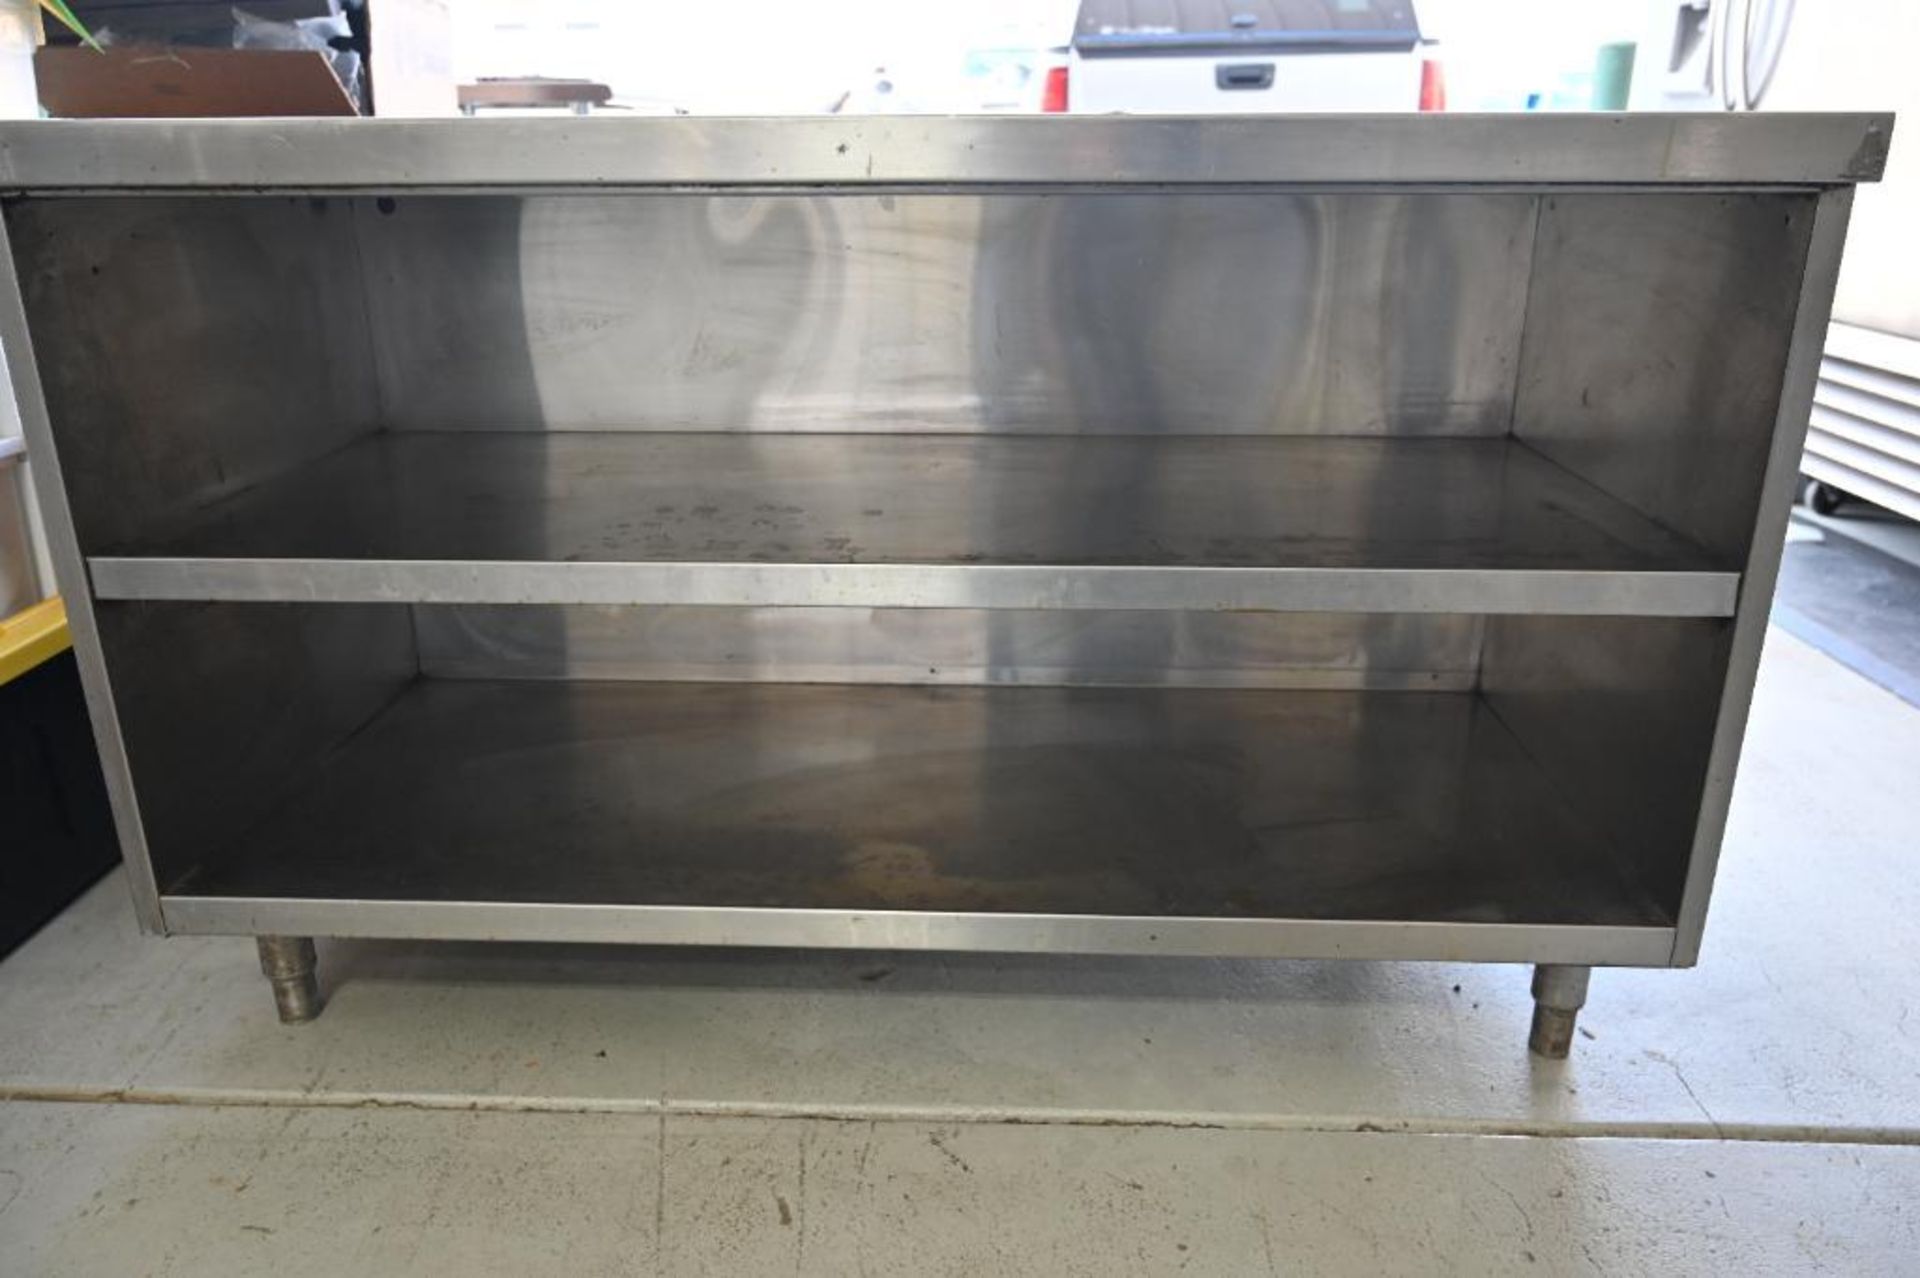 56.25" x 34" x 34.25" Stainless Steel Table with Two Shelves - Image 6 of 10